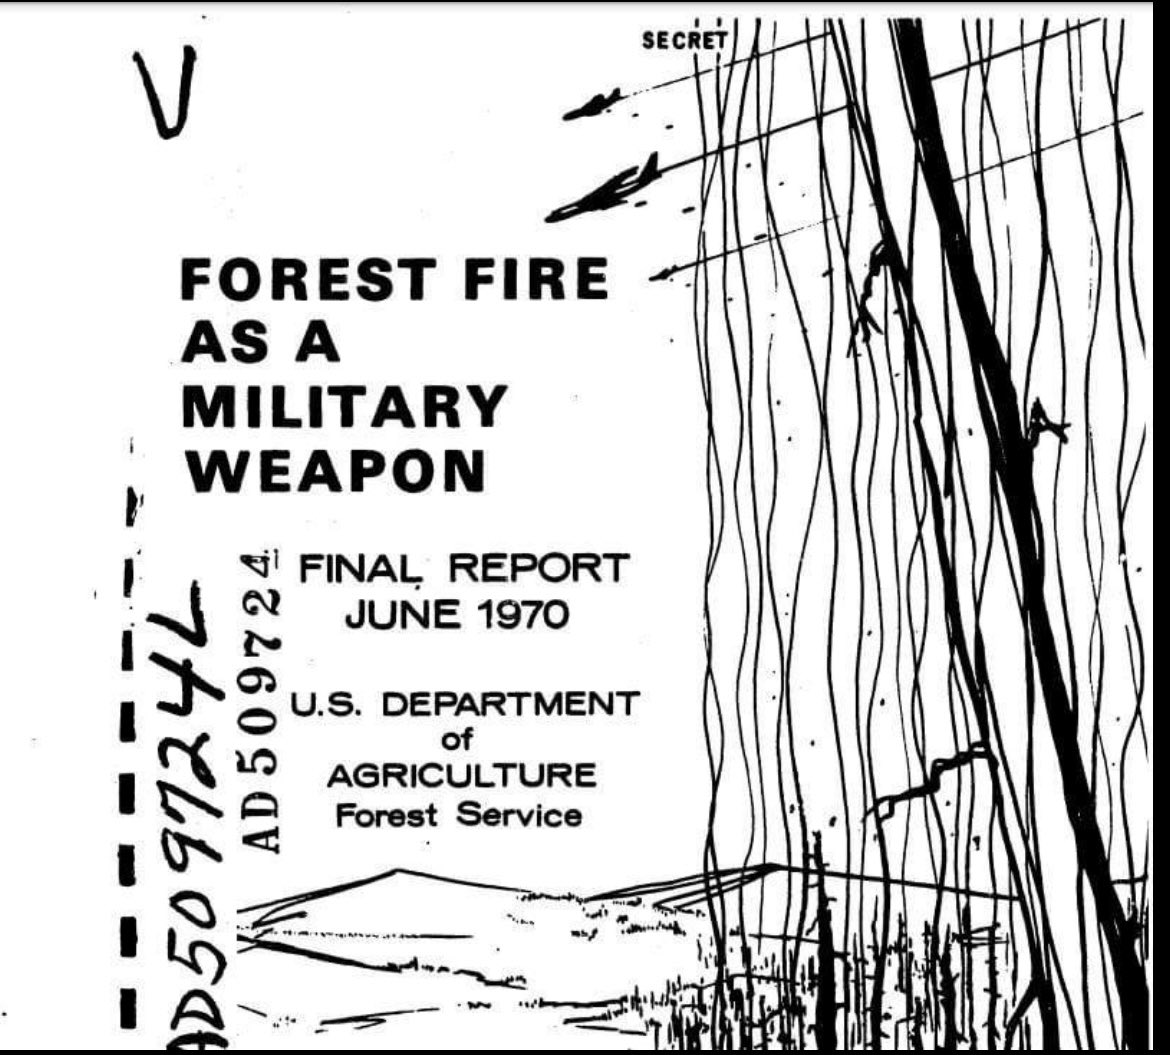 #lahaina #mauifires #DEW #directenergyweapons they rlly memory holed this event. Always remember they have card and are known to use it.